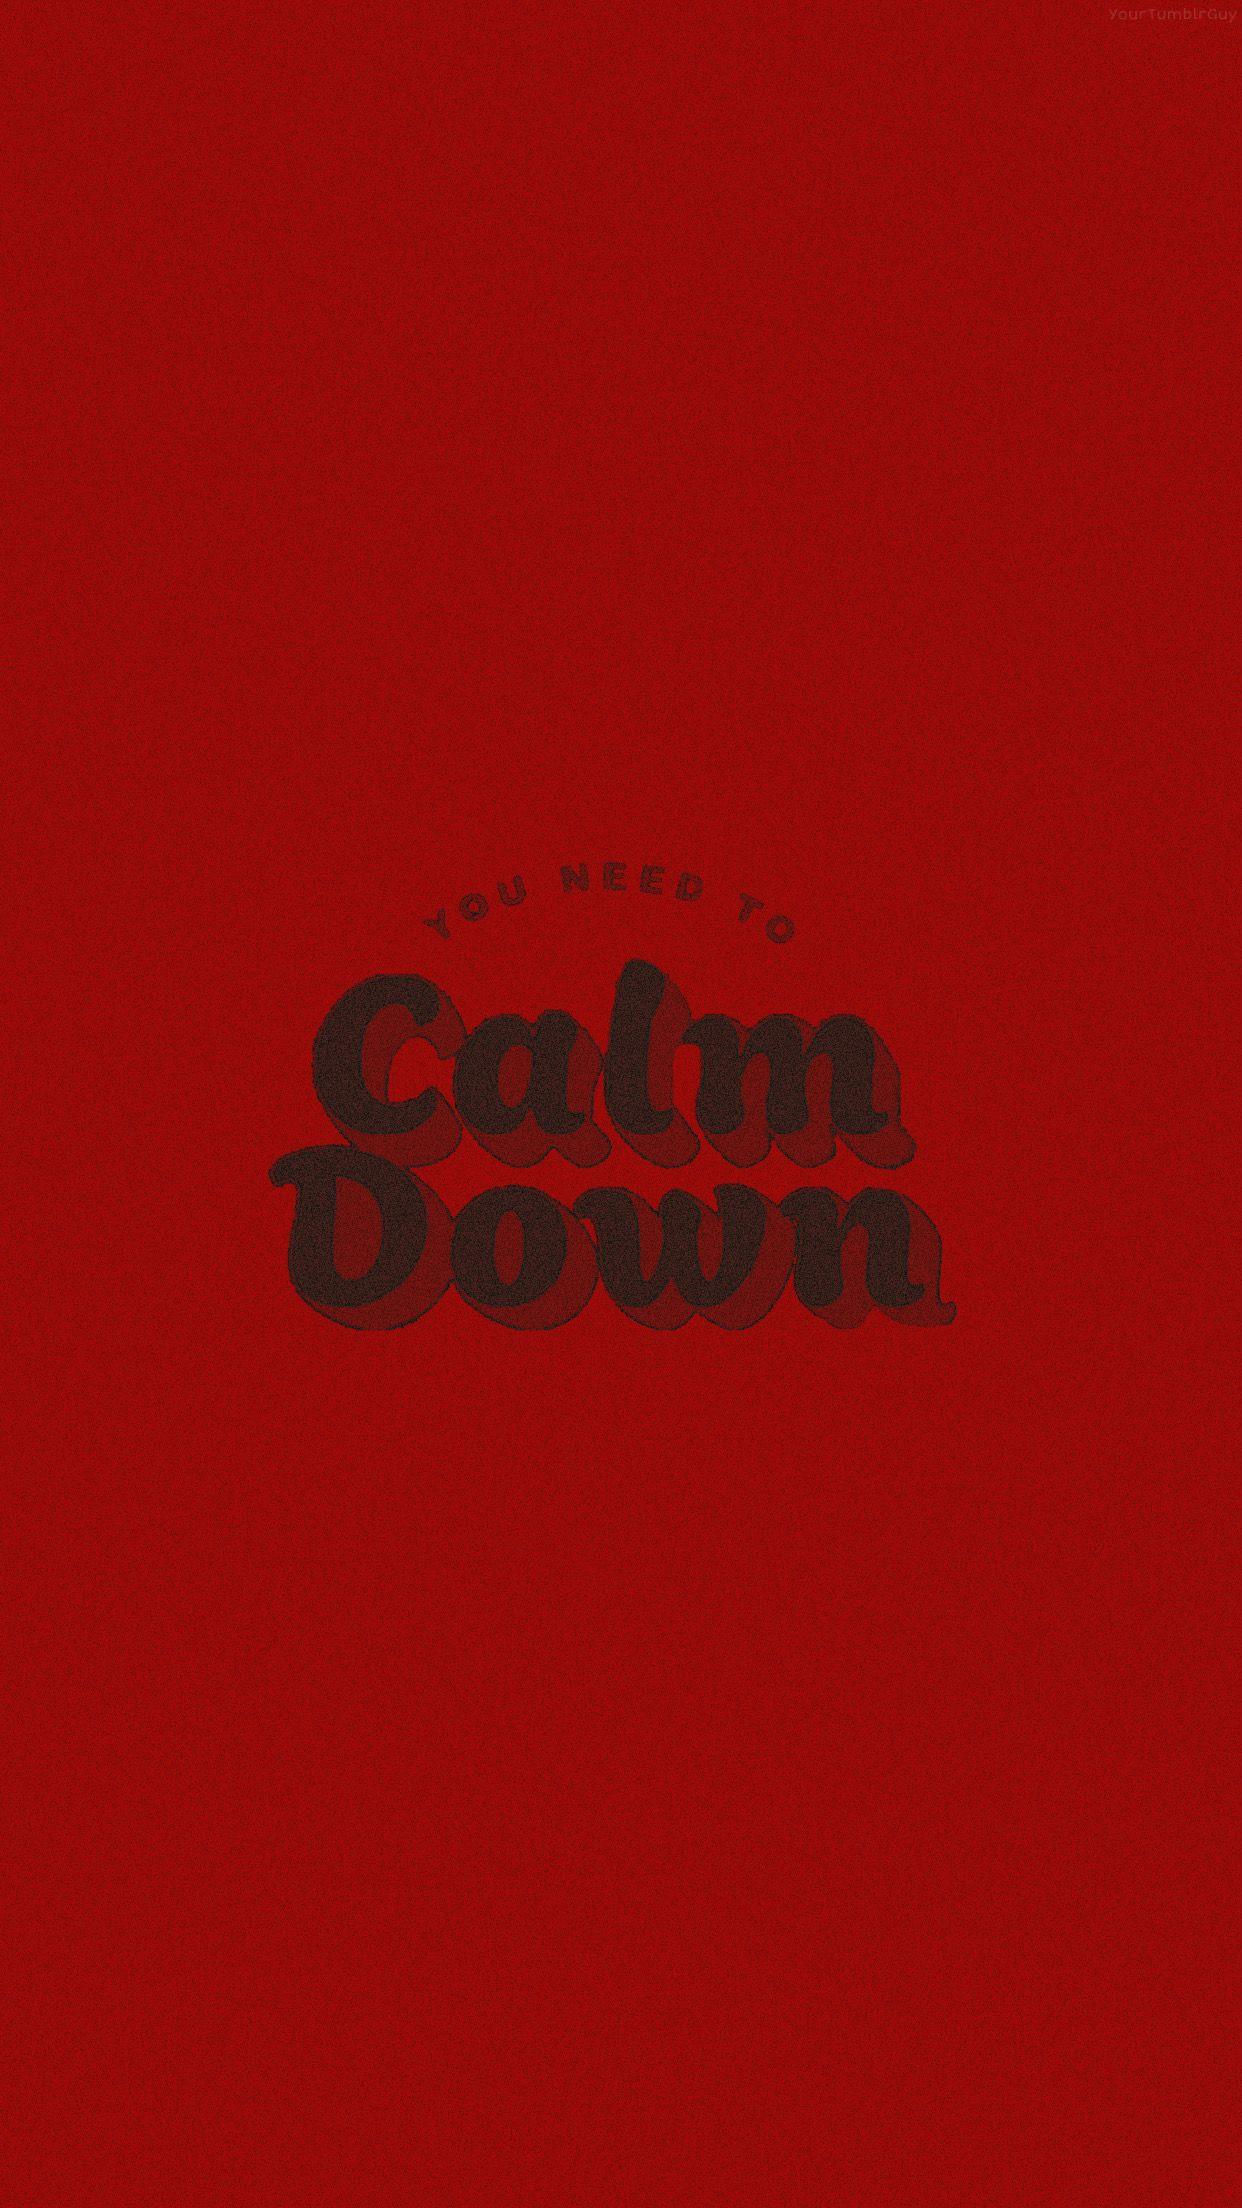 You Need To Calm Down Aesthetic wallpaper. Aesthetic wallpaper